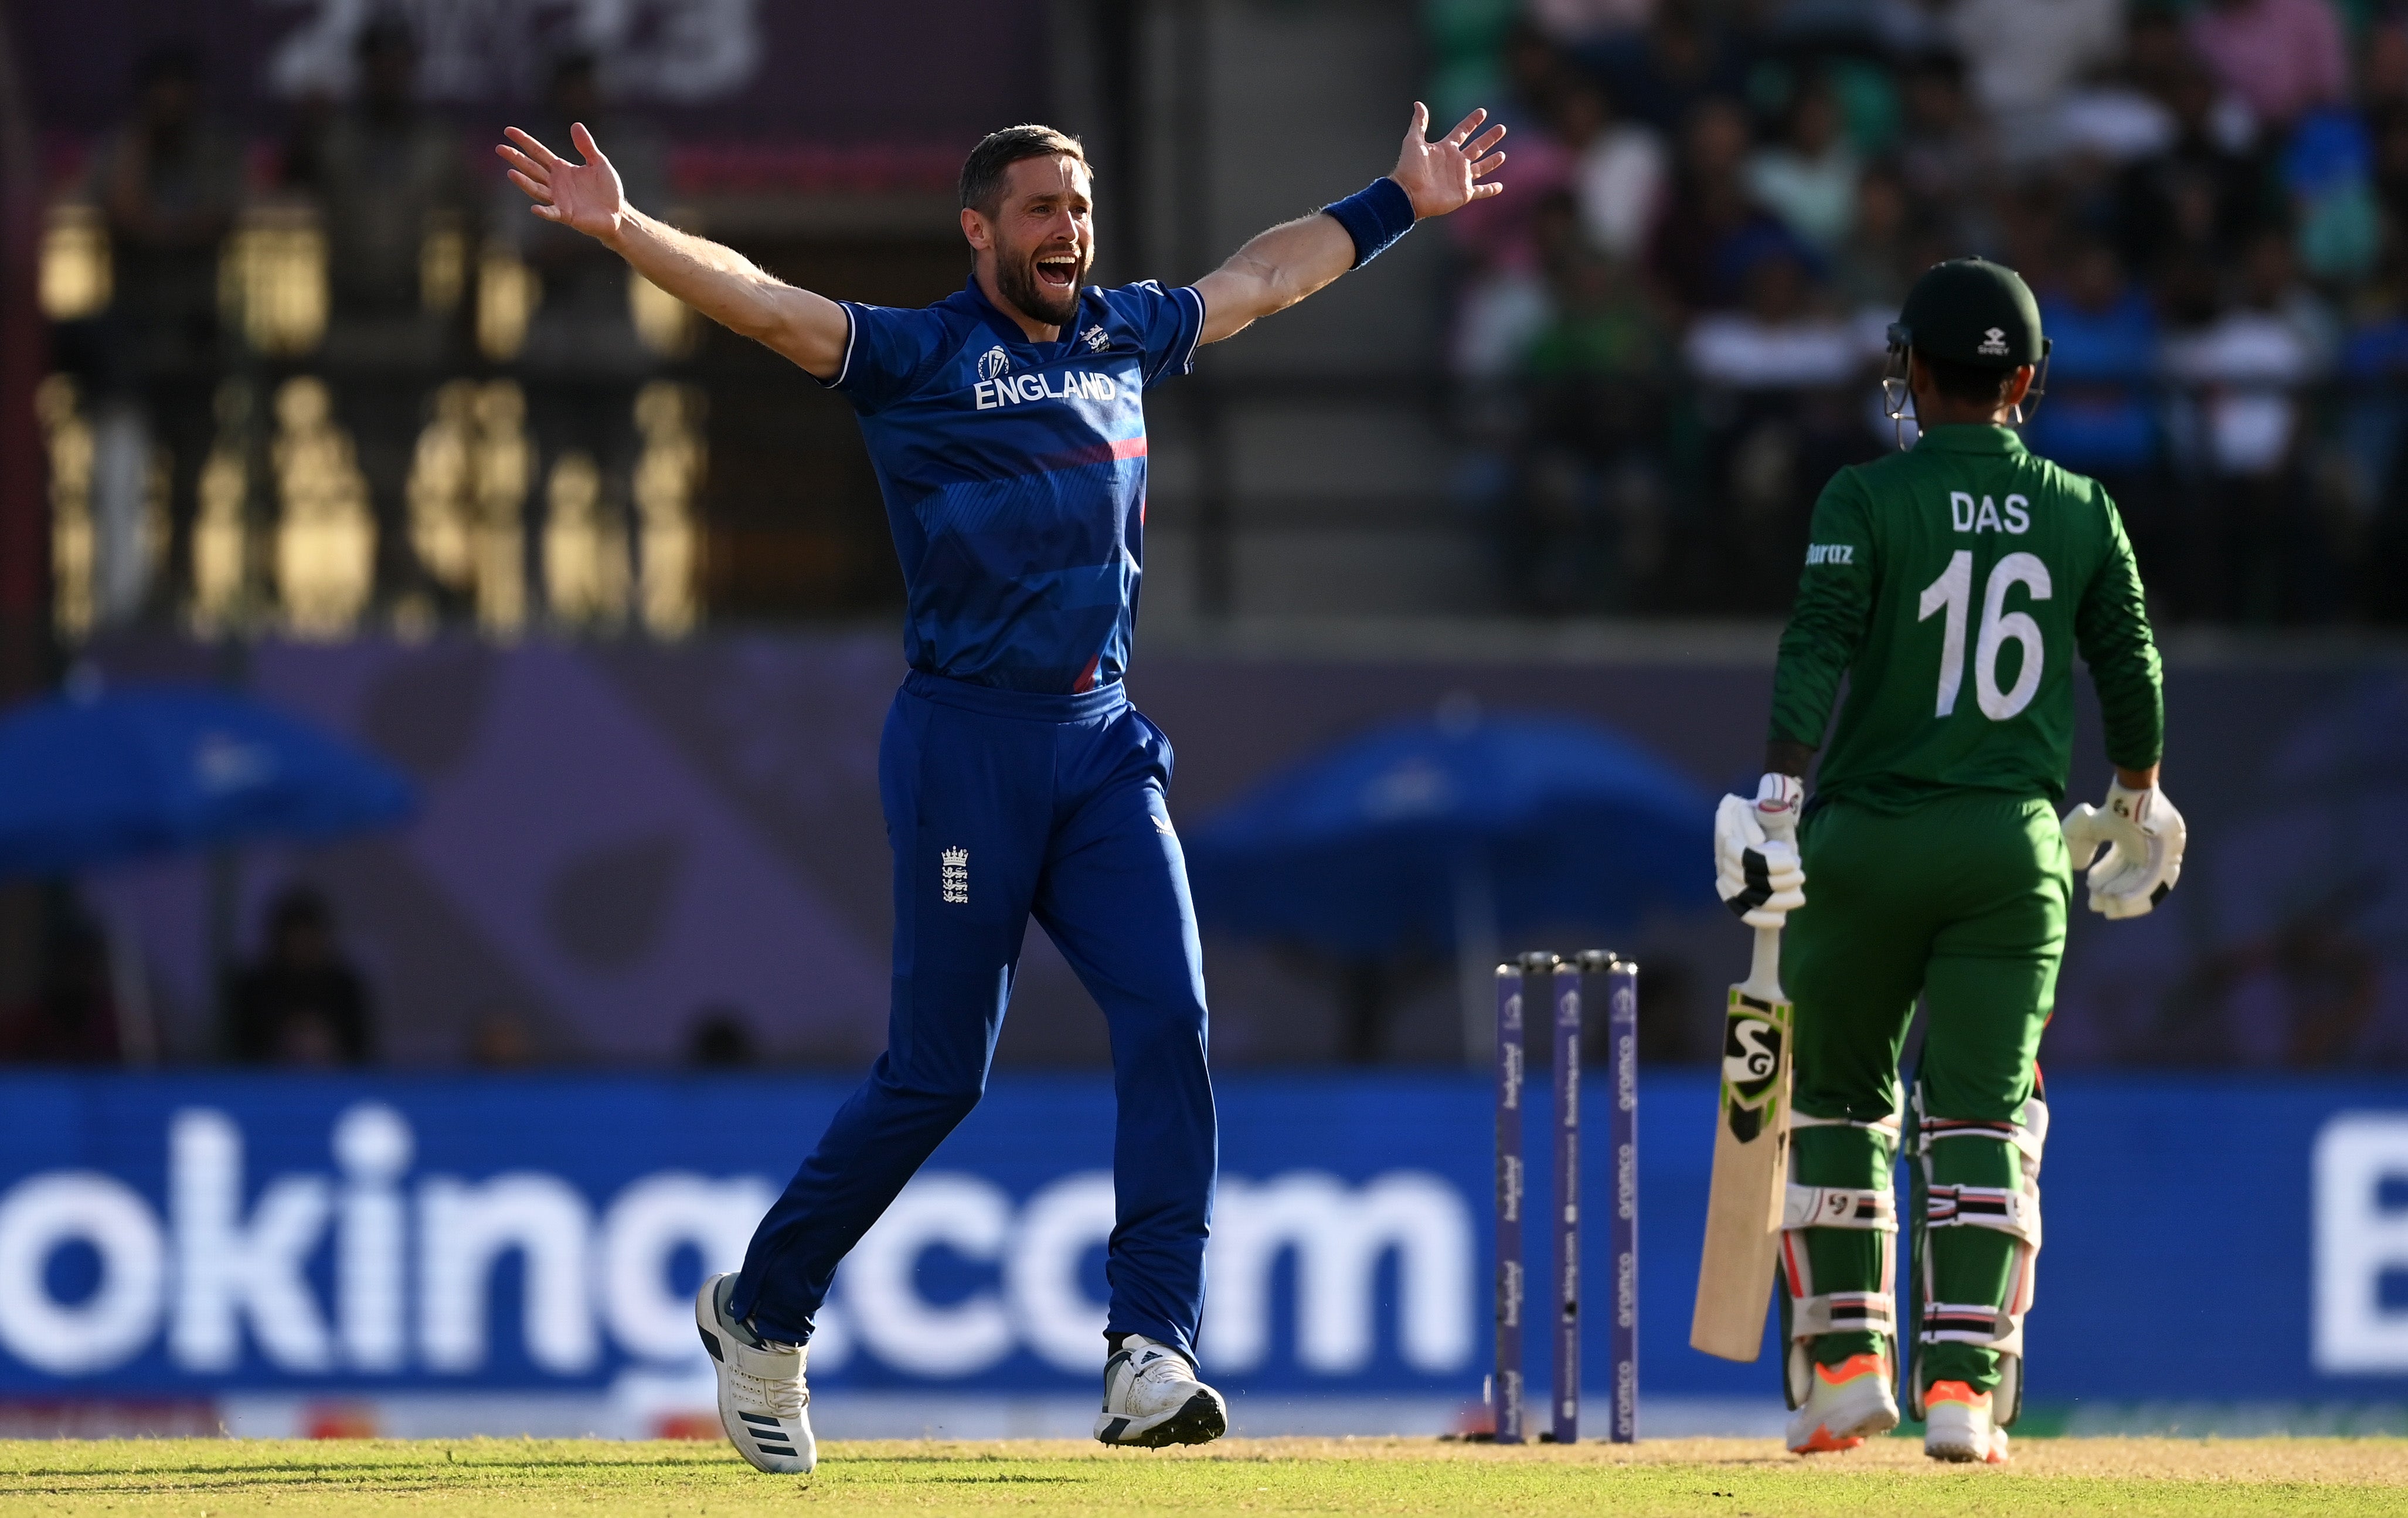 Chris Woakes has not found his form at the World Cup so far